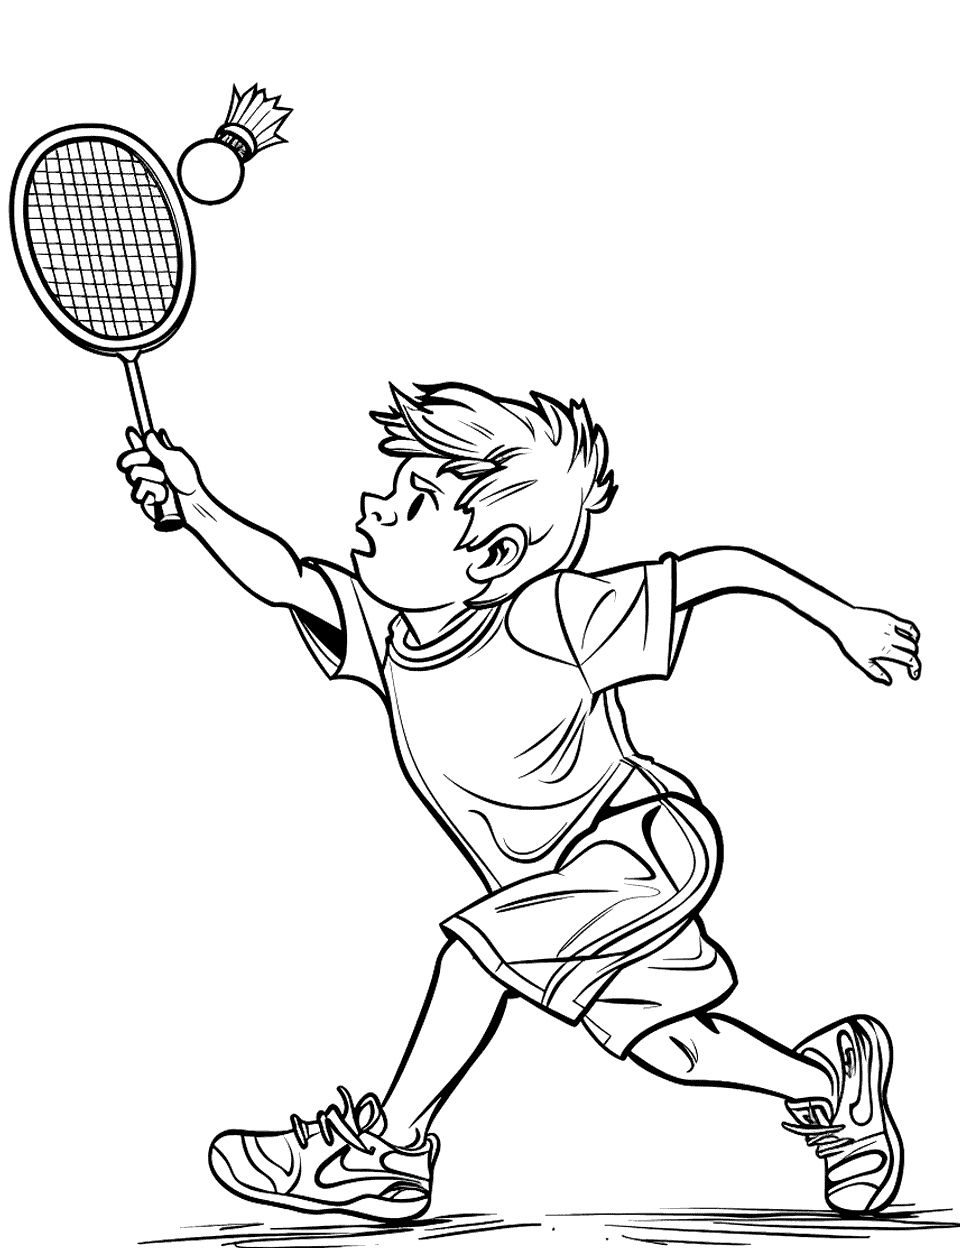 Badminton Shuttlecock Sports Coloring Page - A player in a badminton match is about to return the shuttlecock.